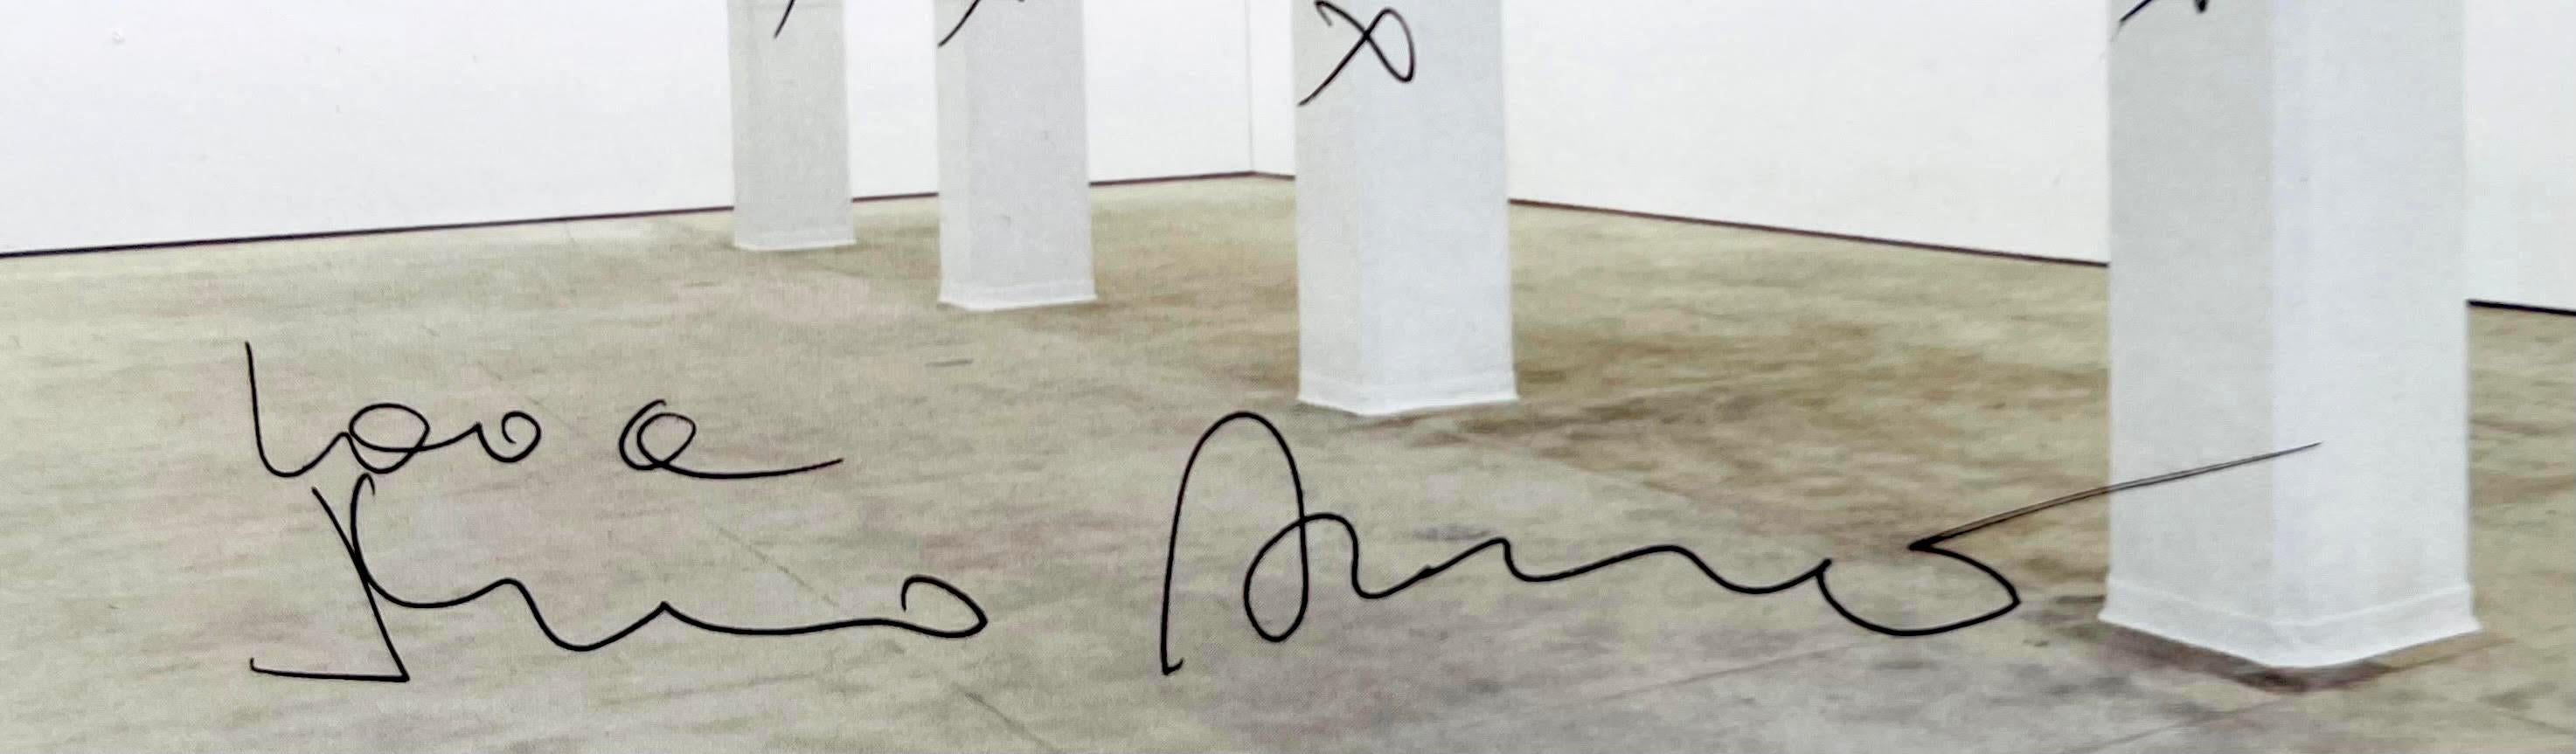 Exhibition invitation card (Hand Signed and inscribed by Marina Abramovic) For Sale 1